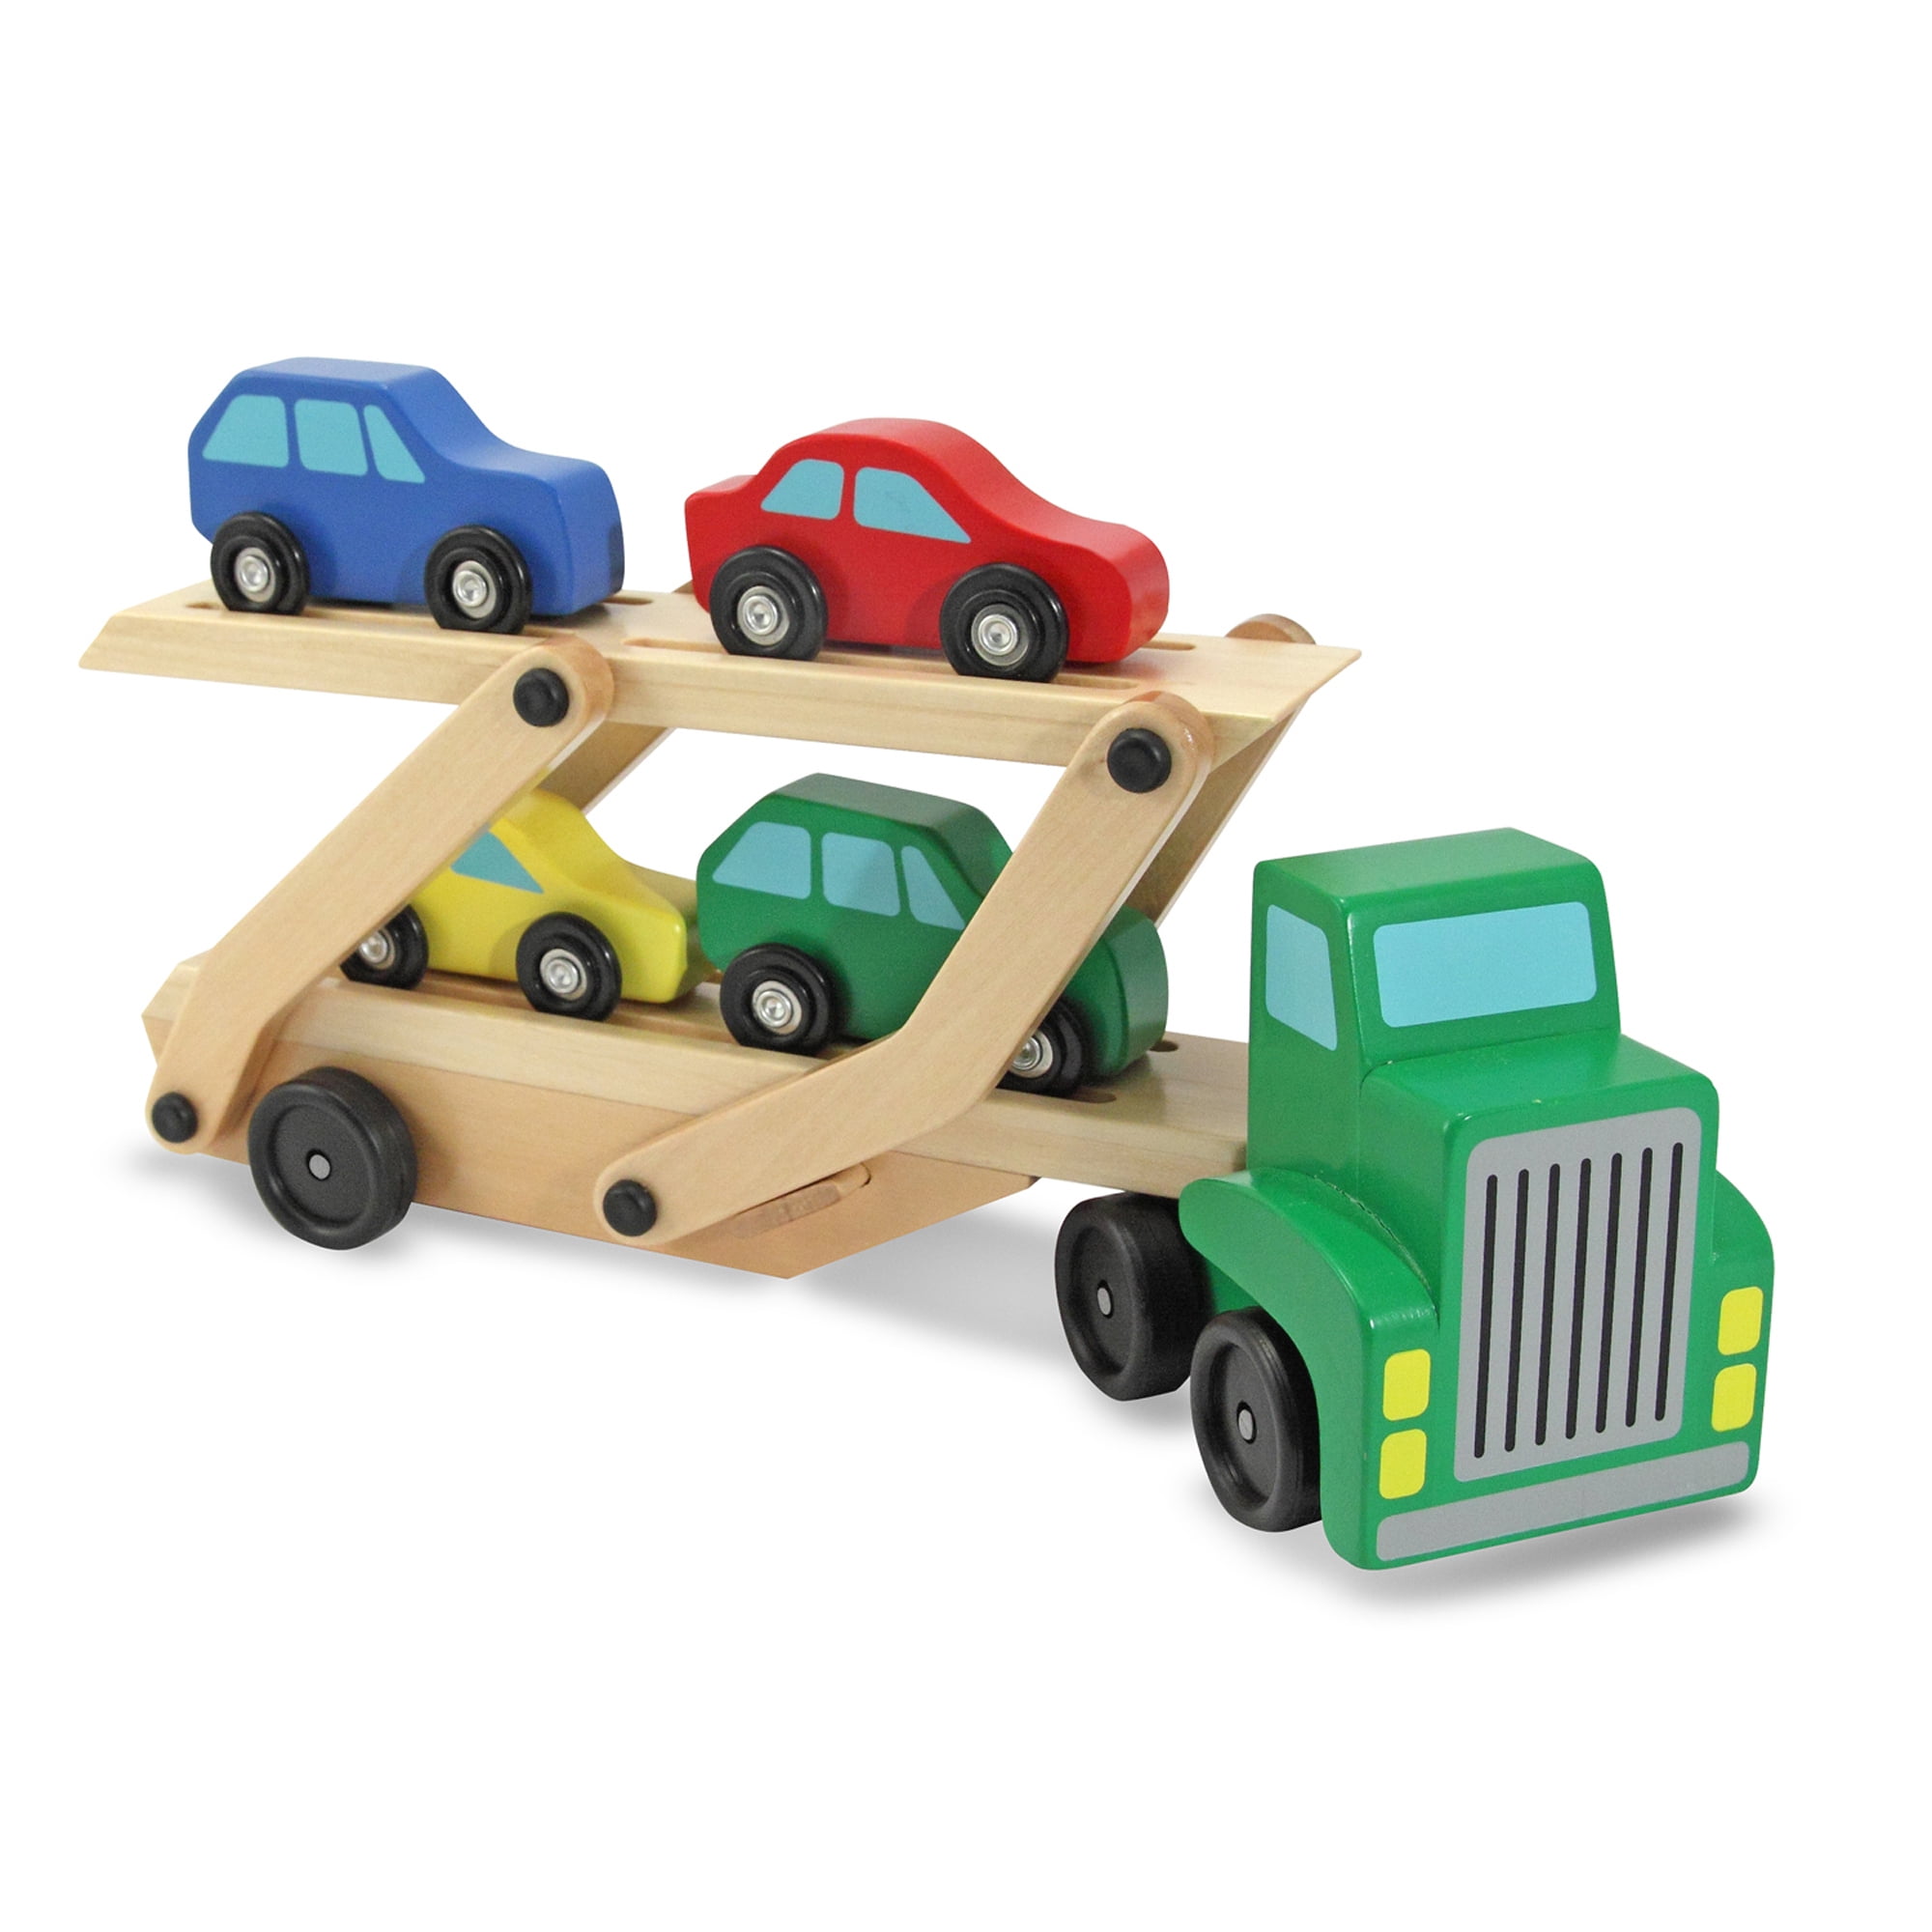 sethland Trucks Toys for Boys, Carrier Truck Cars with 6 Small